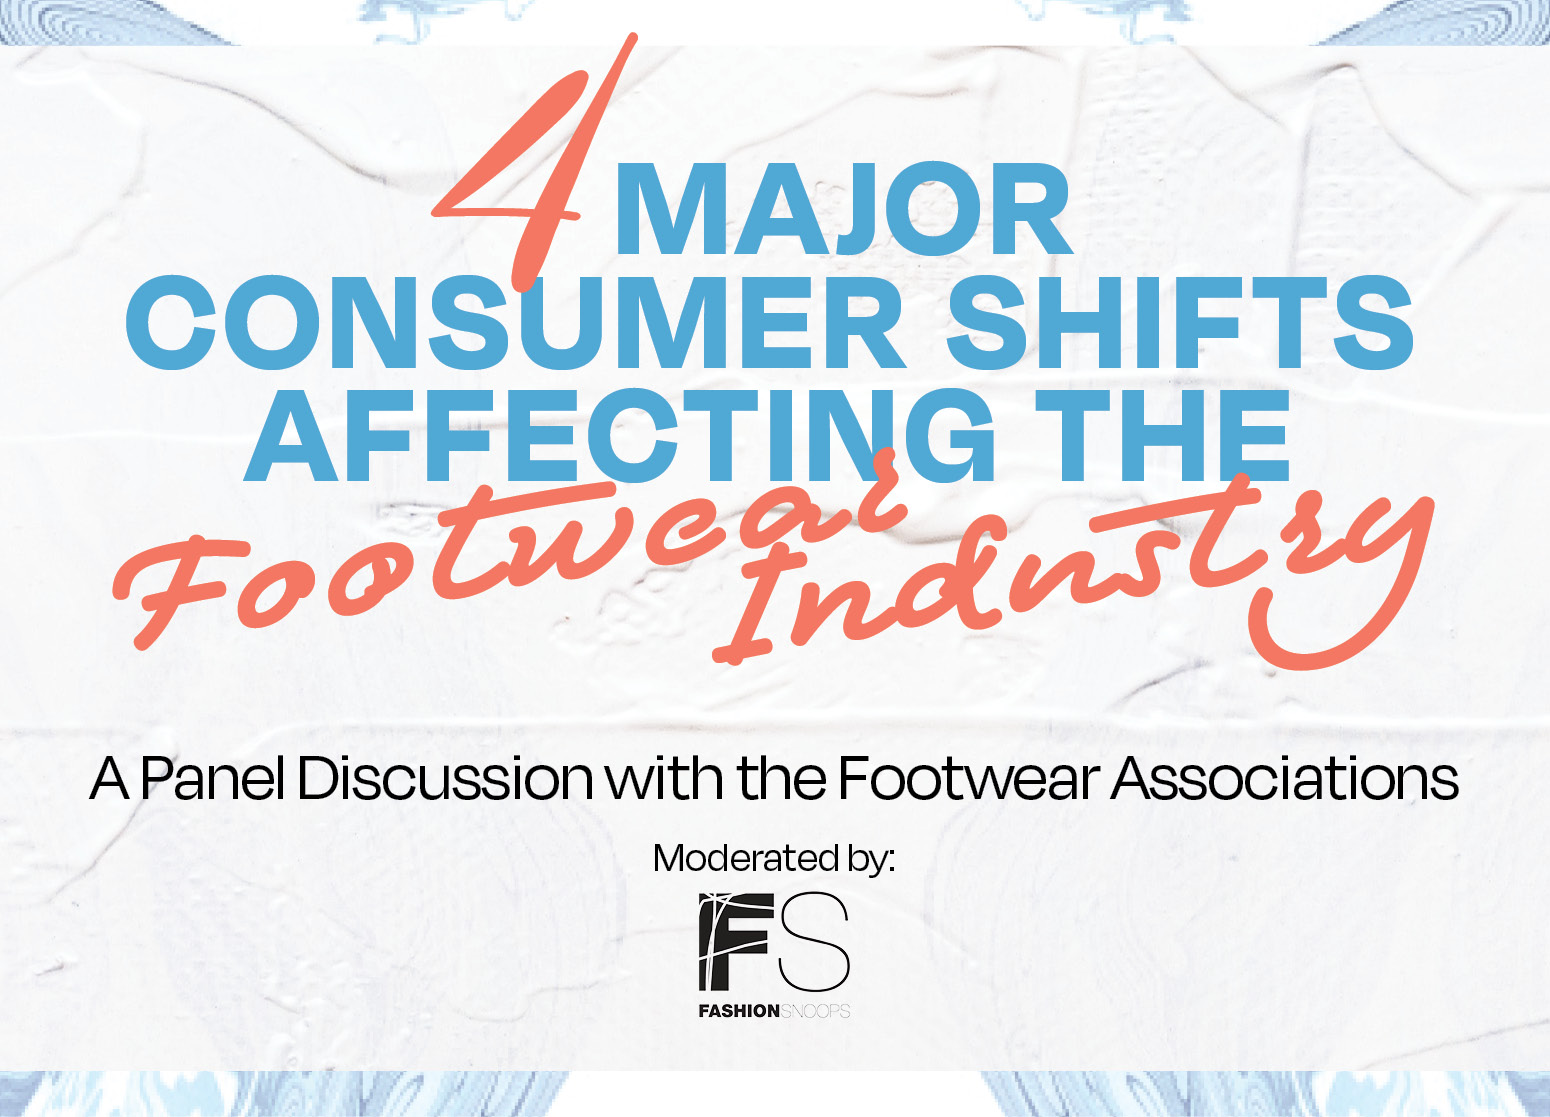 4 Major Consumer Shifts Affecting the Footwear Industry